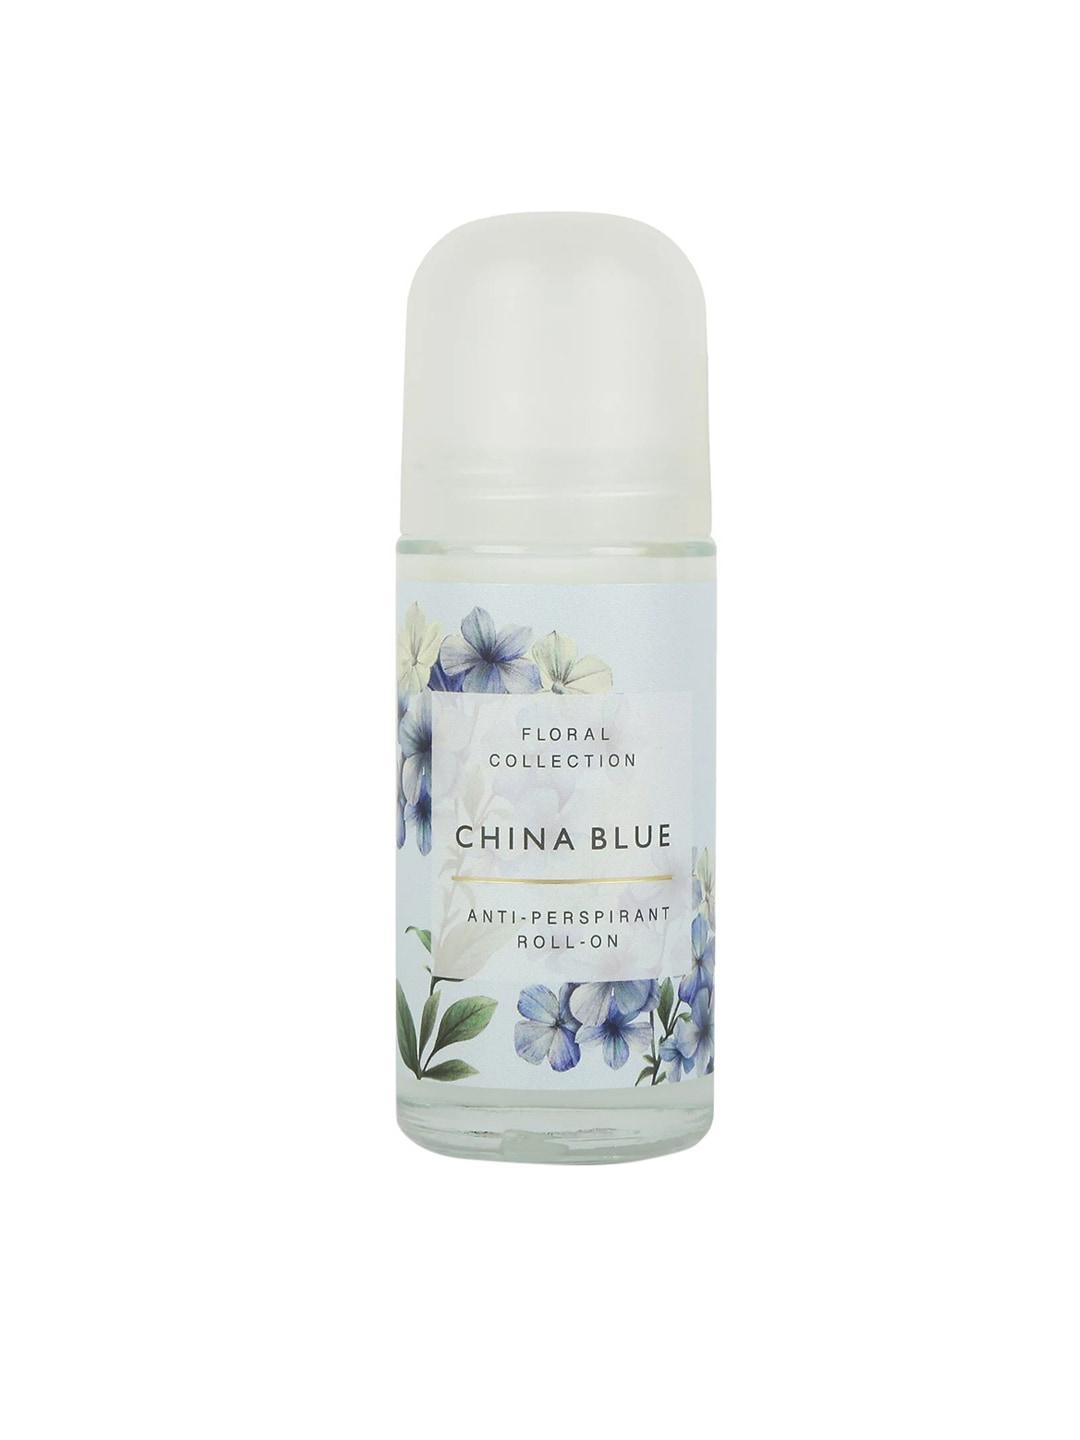 Marks & Spencer China Blue Anti-Perspirant Roll-On 50ml